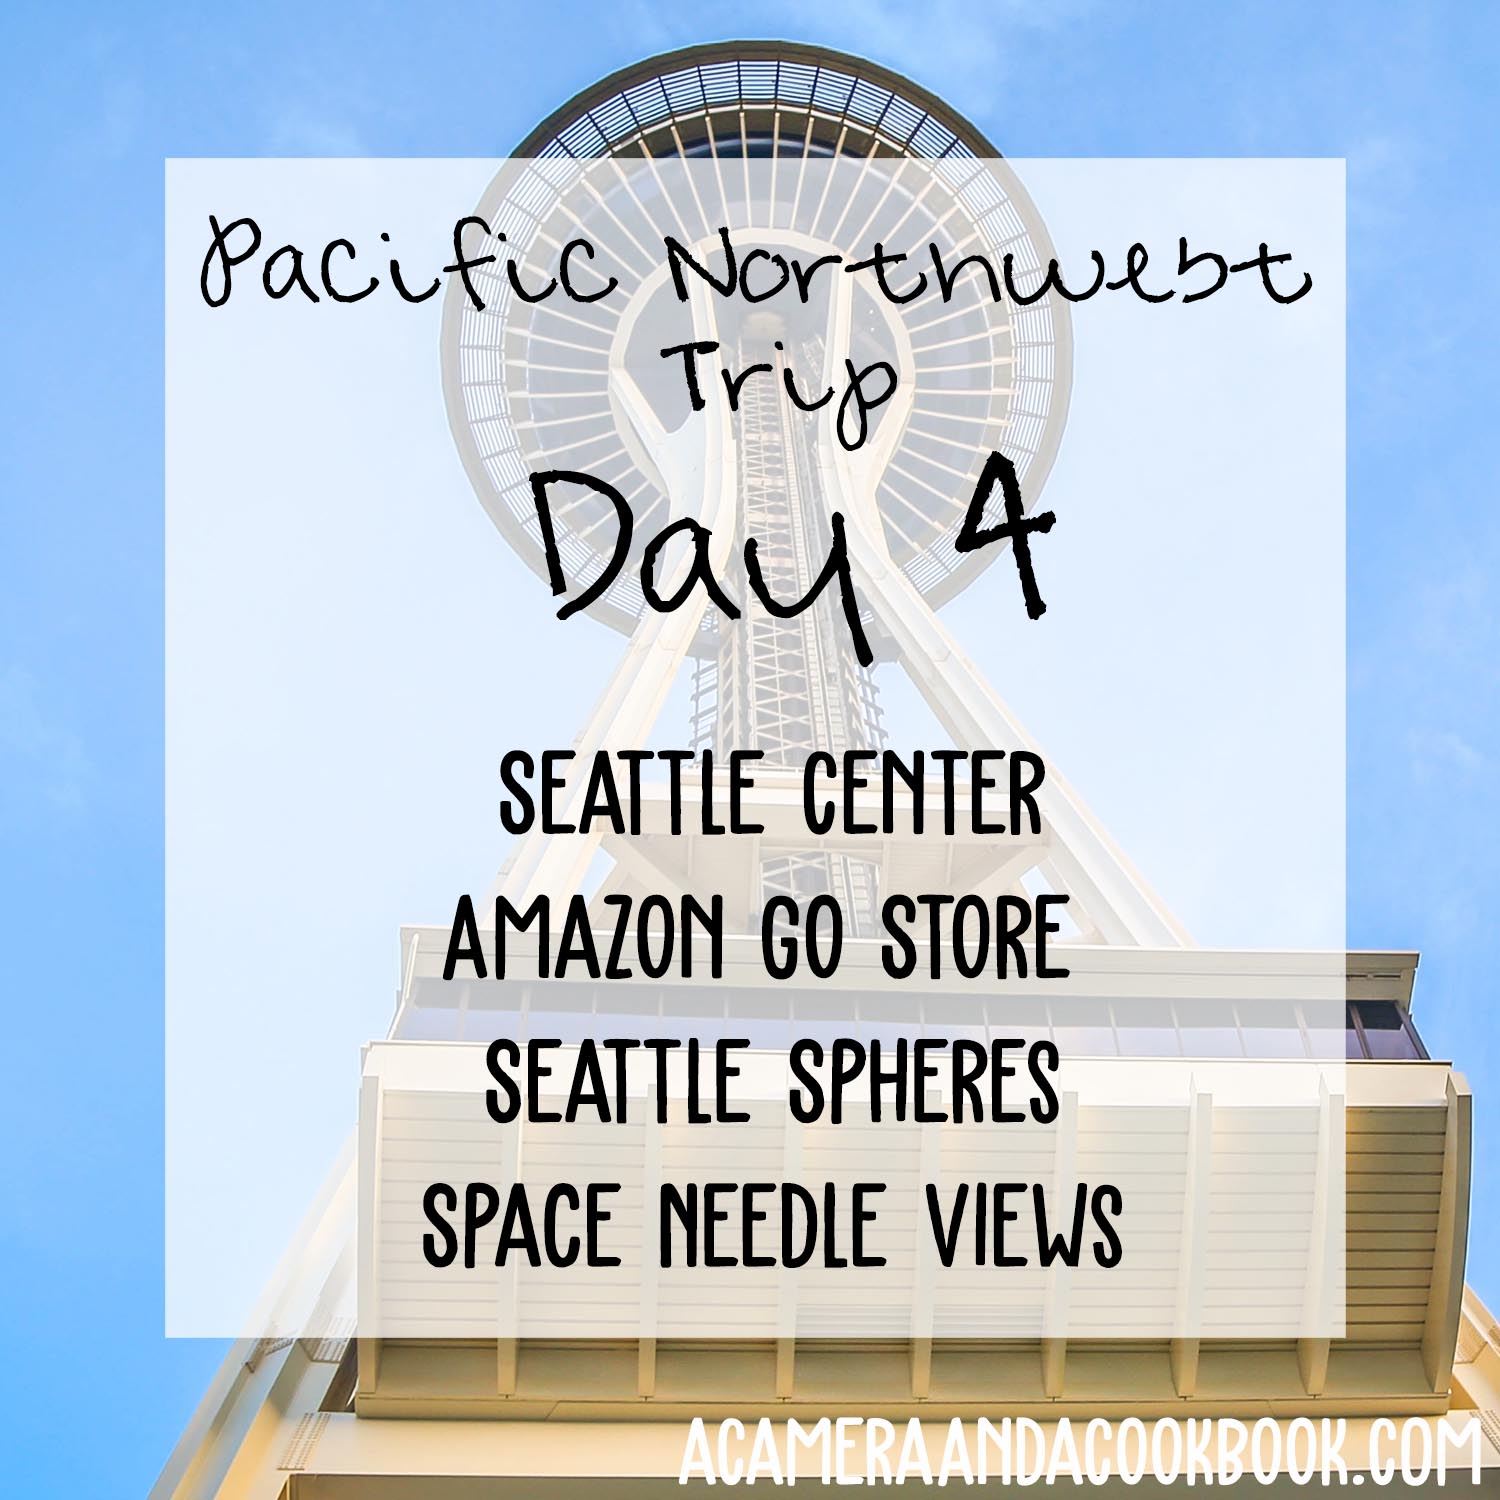 Pacific NW Trip: Day 4